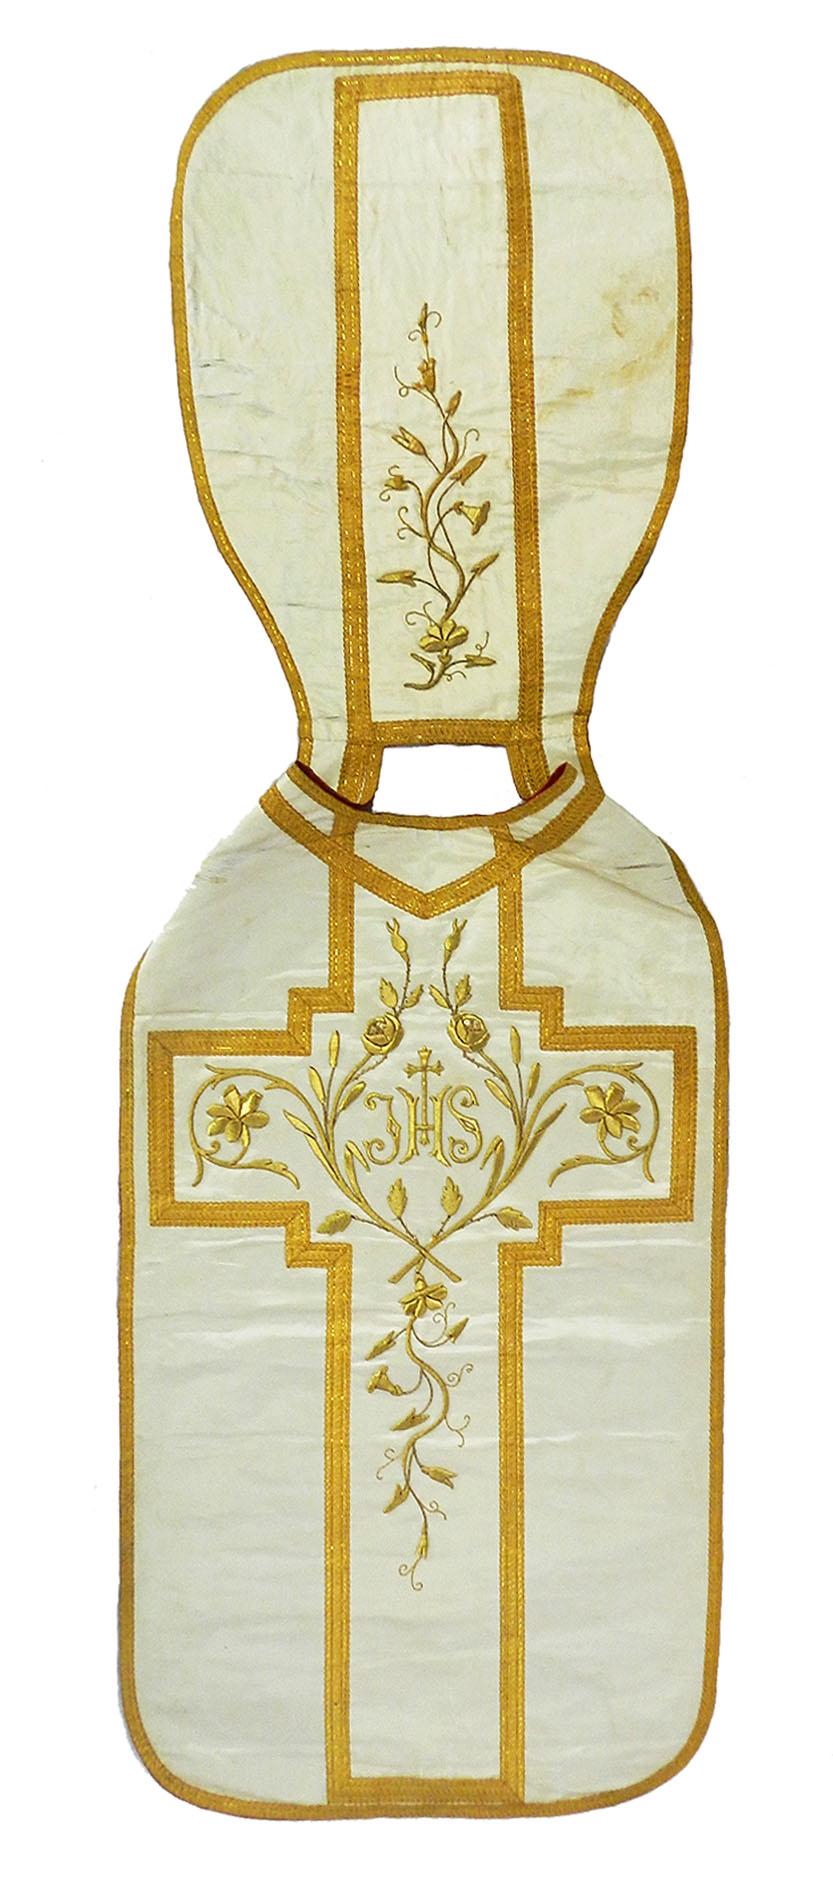 Antique Chasuble Religious vestment embroidered textile, circa 1890-1900
Religious Vestment silk with heavily embroidered with gold thread
Worn when celebrating mass, embroidered on silk with real pure gold thread
Red lining
The outer ceremonial